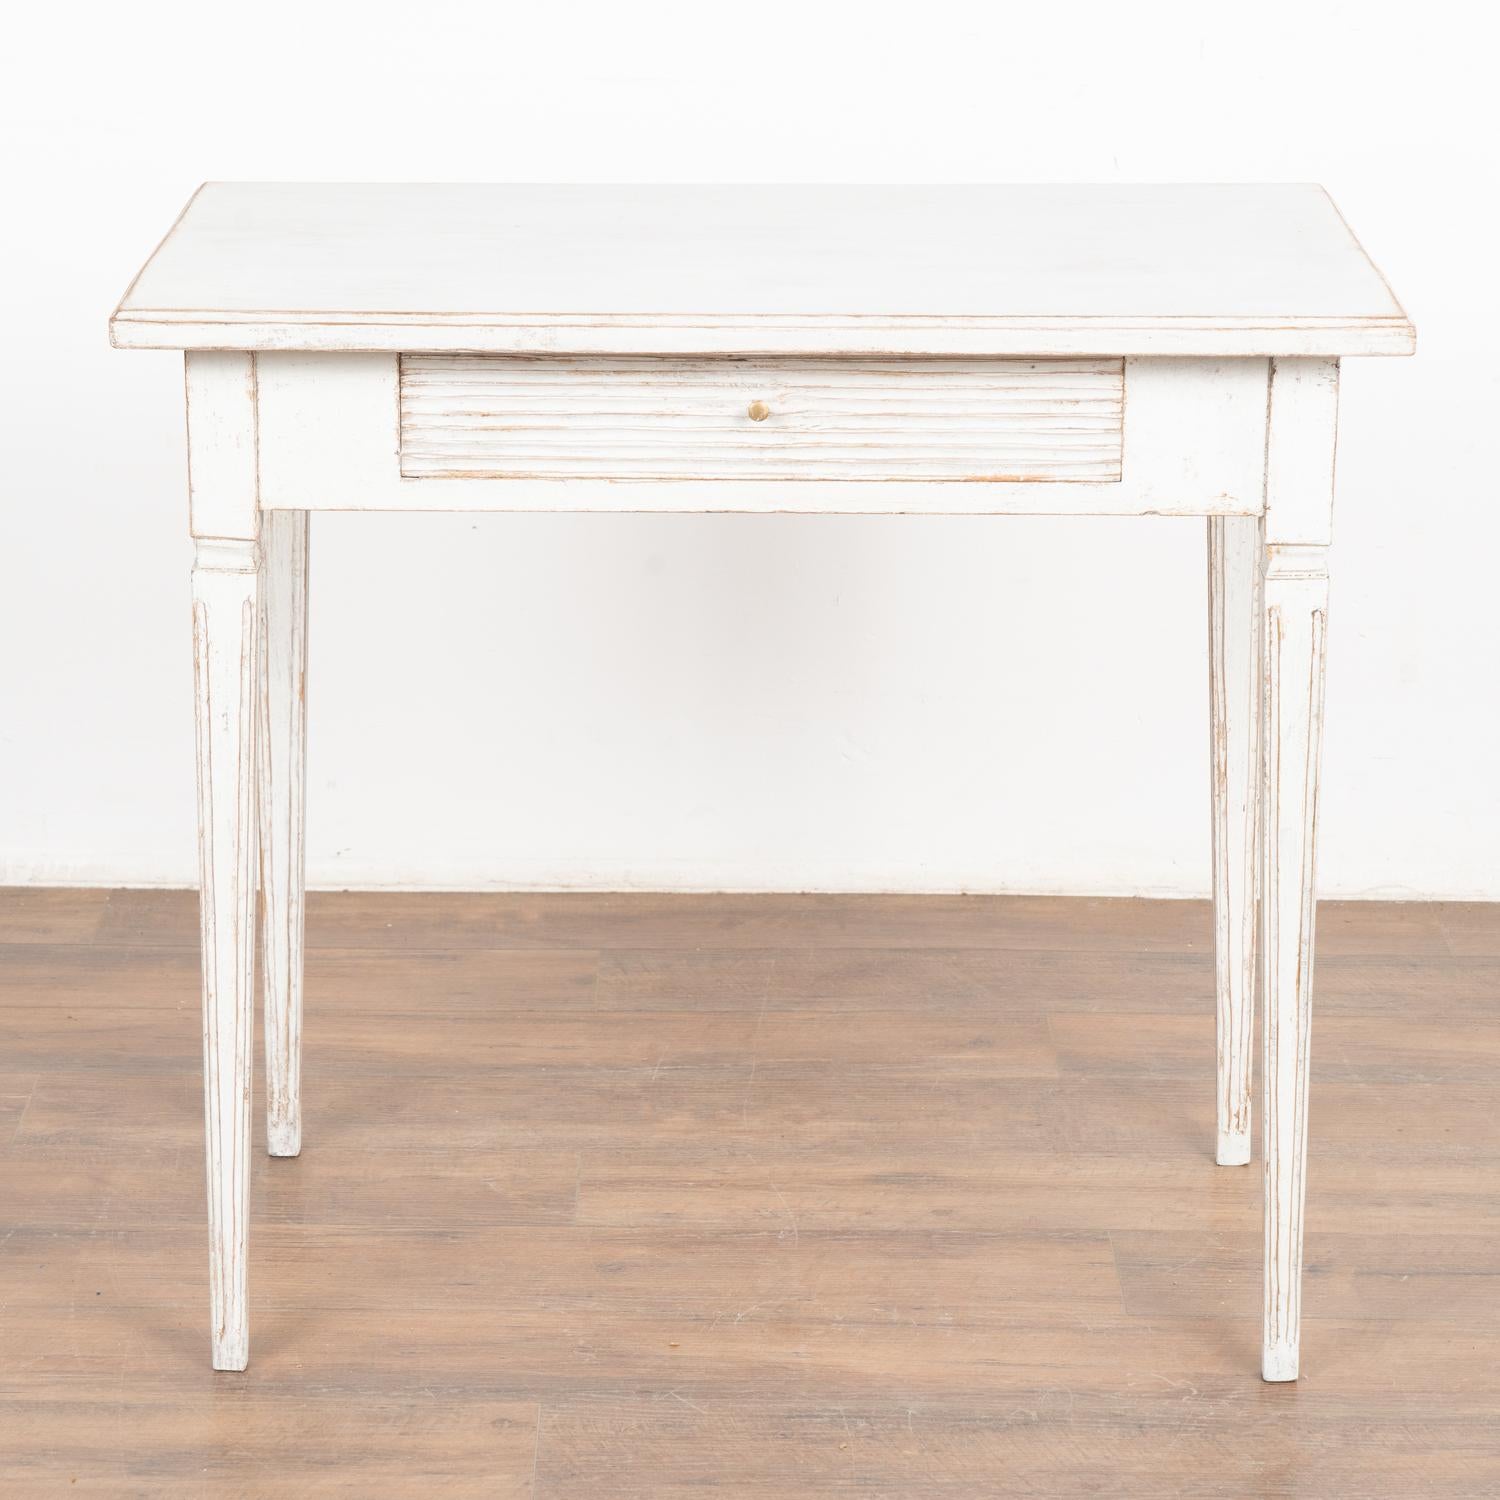 19th Century Antique Swedish Gustavian White Painted Side Table With Drawer, circa 1860-80 For Sale